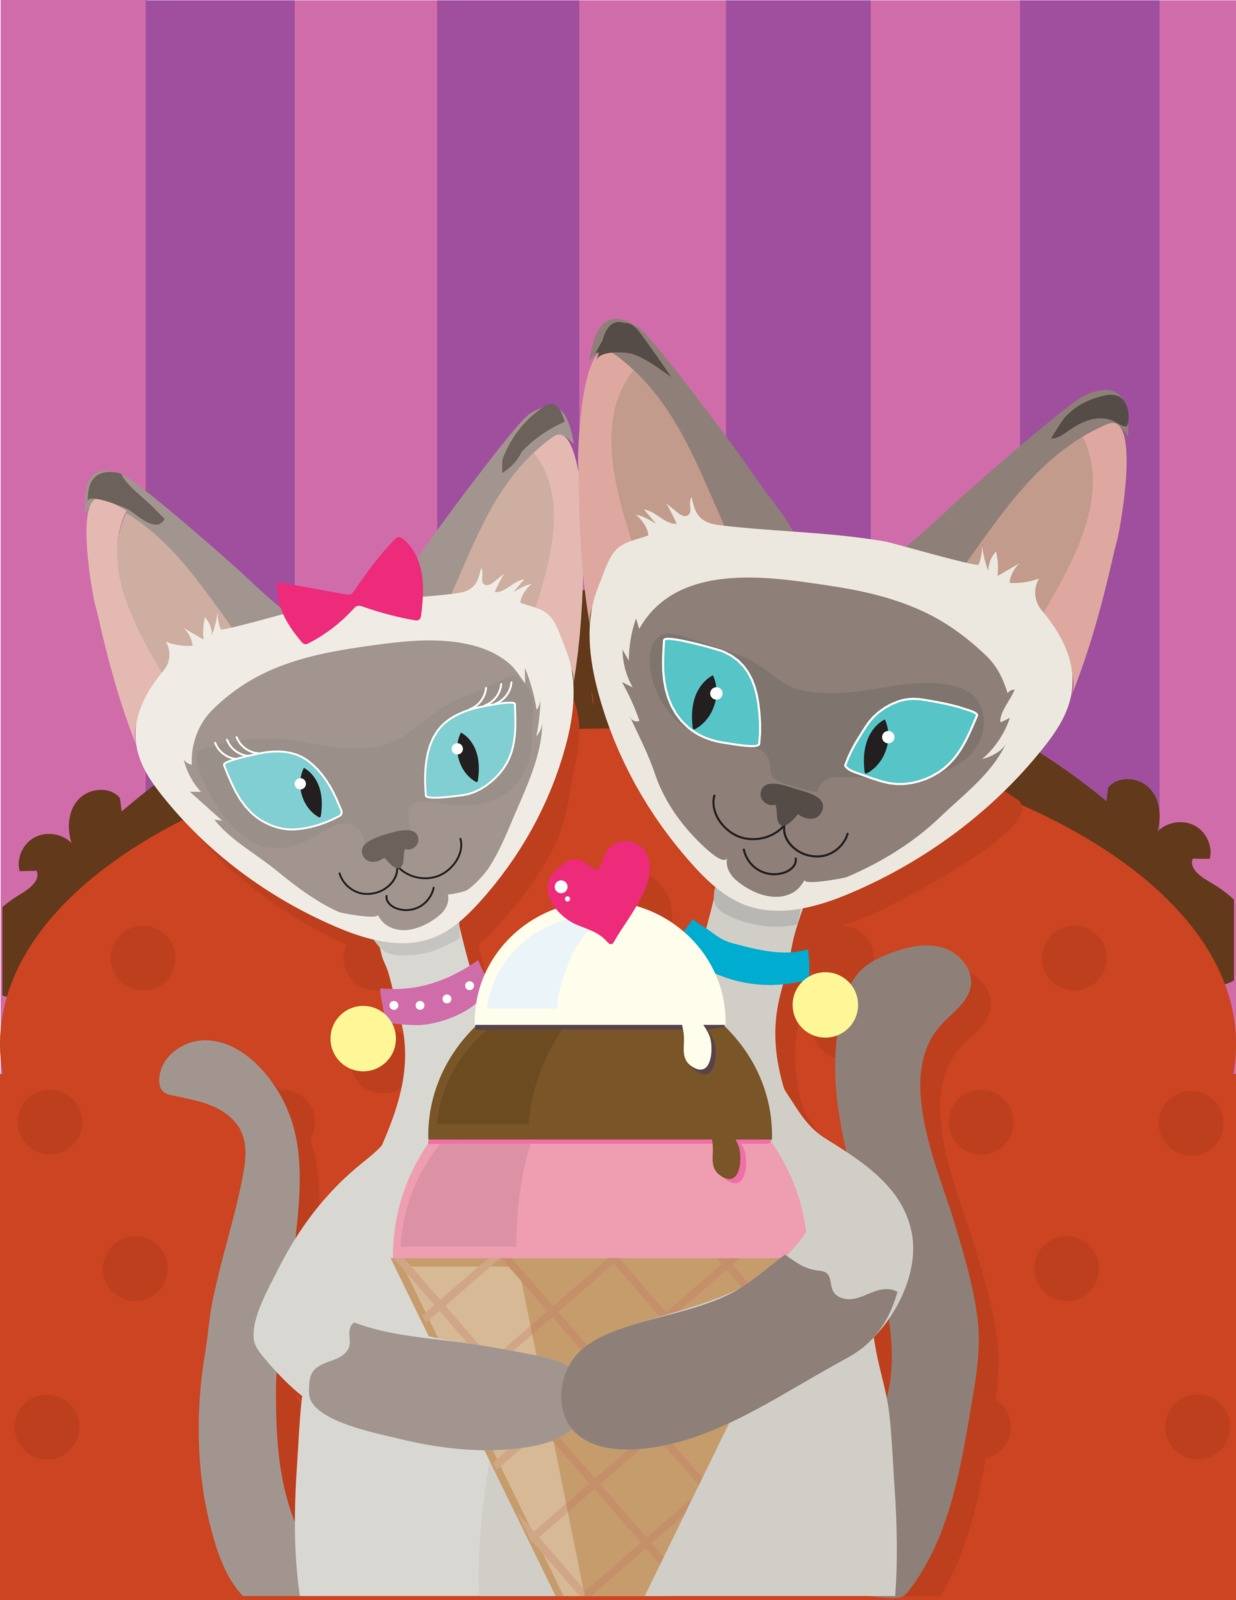 A pair of Siamese Cats are enjoying an ice cream cone together